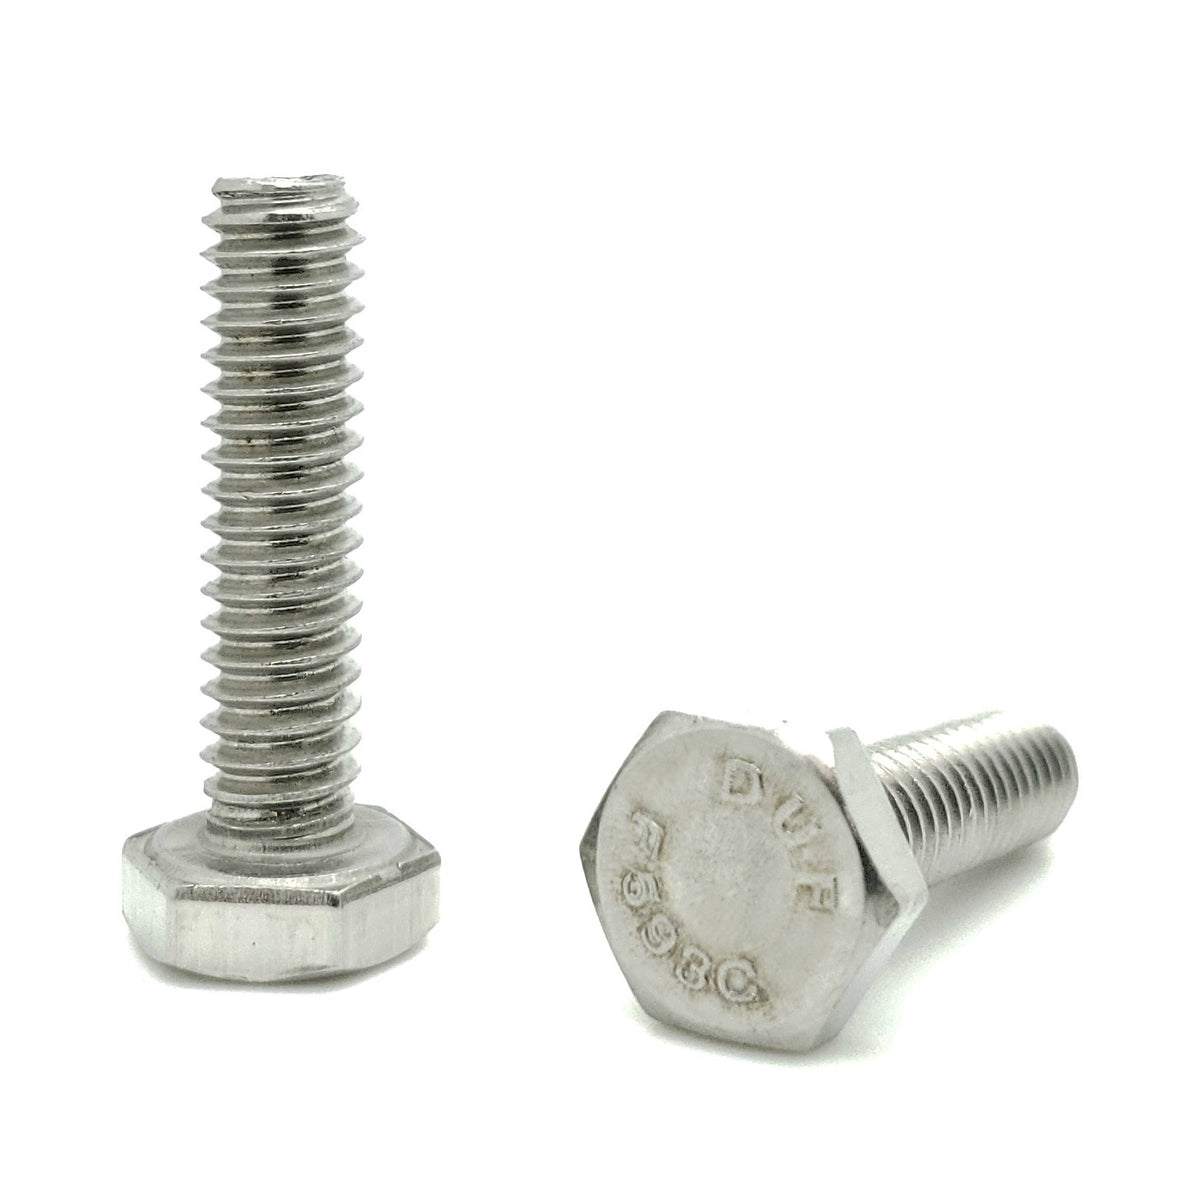 25 Qty 14 20 X 1 304 Stainless Steel Hex Head Cap Screw Bolts Bcp